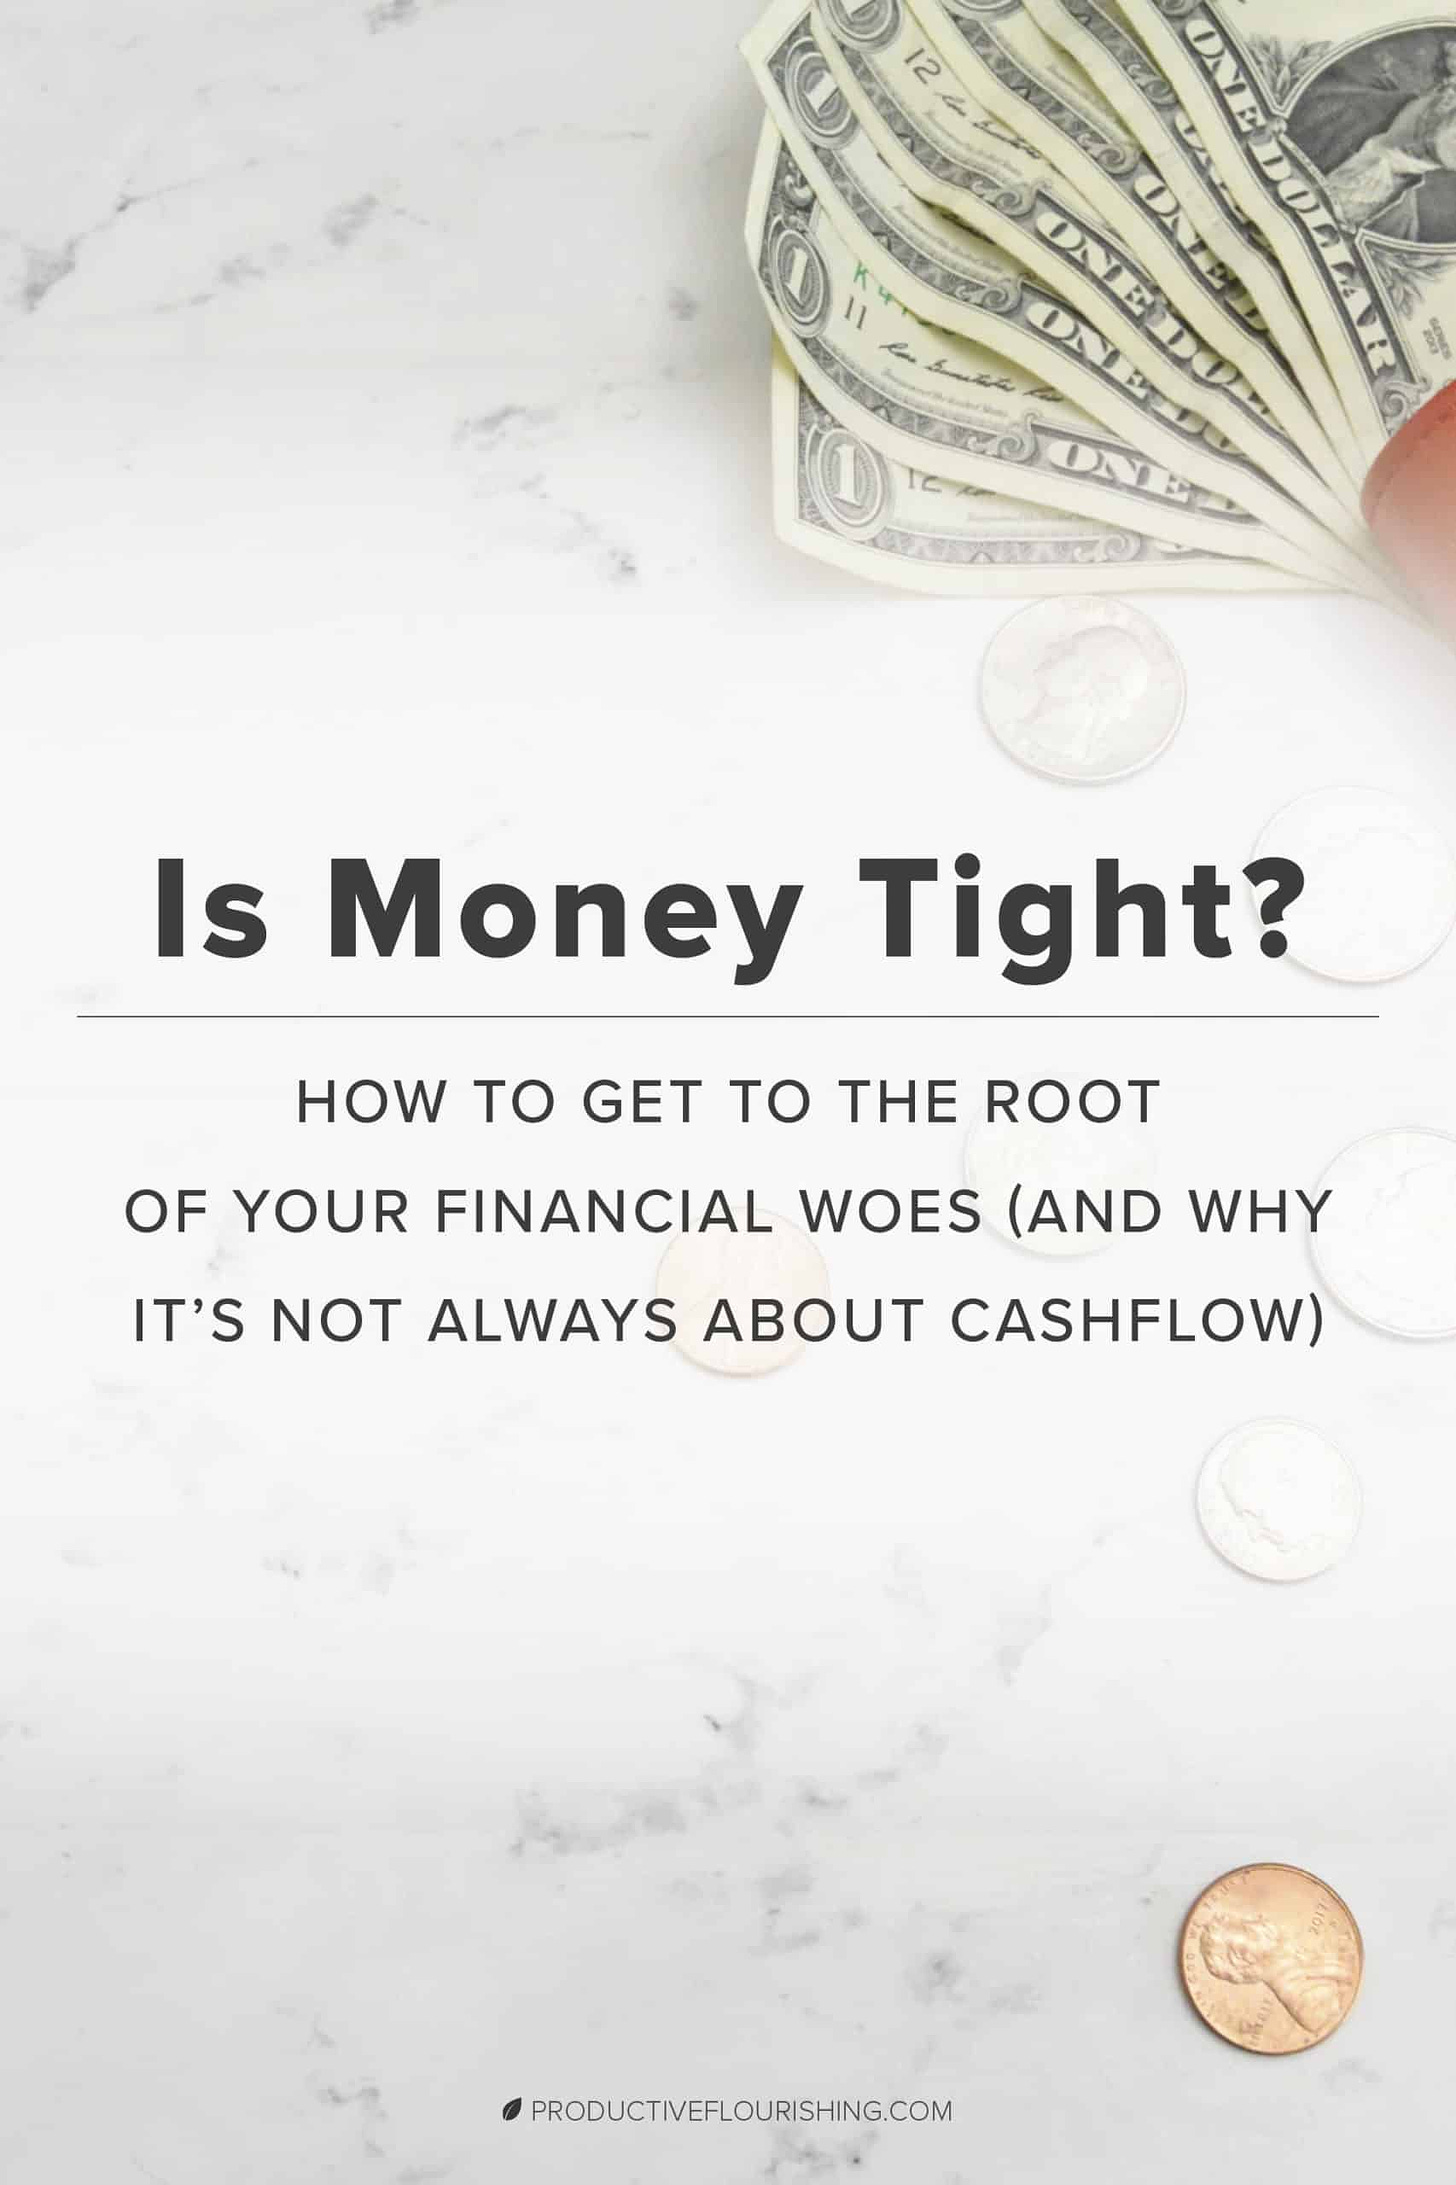 Is Money Tight? Every business eventually encounters a season when money is tight. This season in entrepreneurship is also an incredible opportunity to evaluate, adapt, and innovate. Learn how viewing those seasons when money becomes a bottleneck as good things. #smallbusiness #cashflowproblem #productiveflourishing